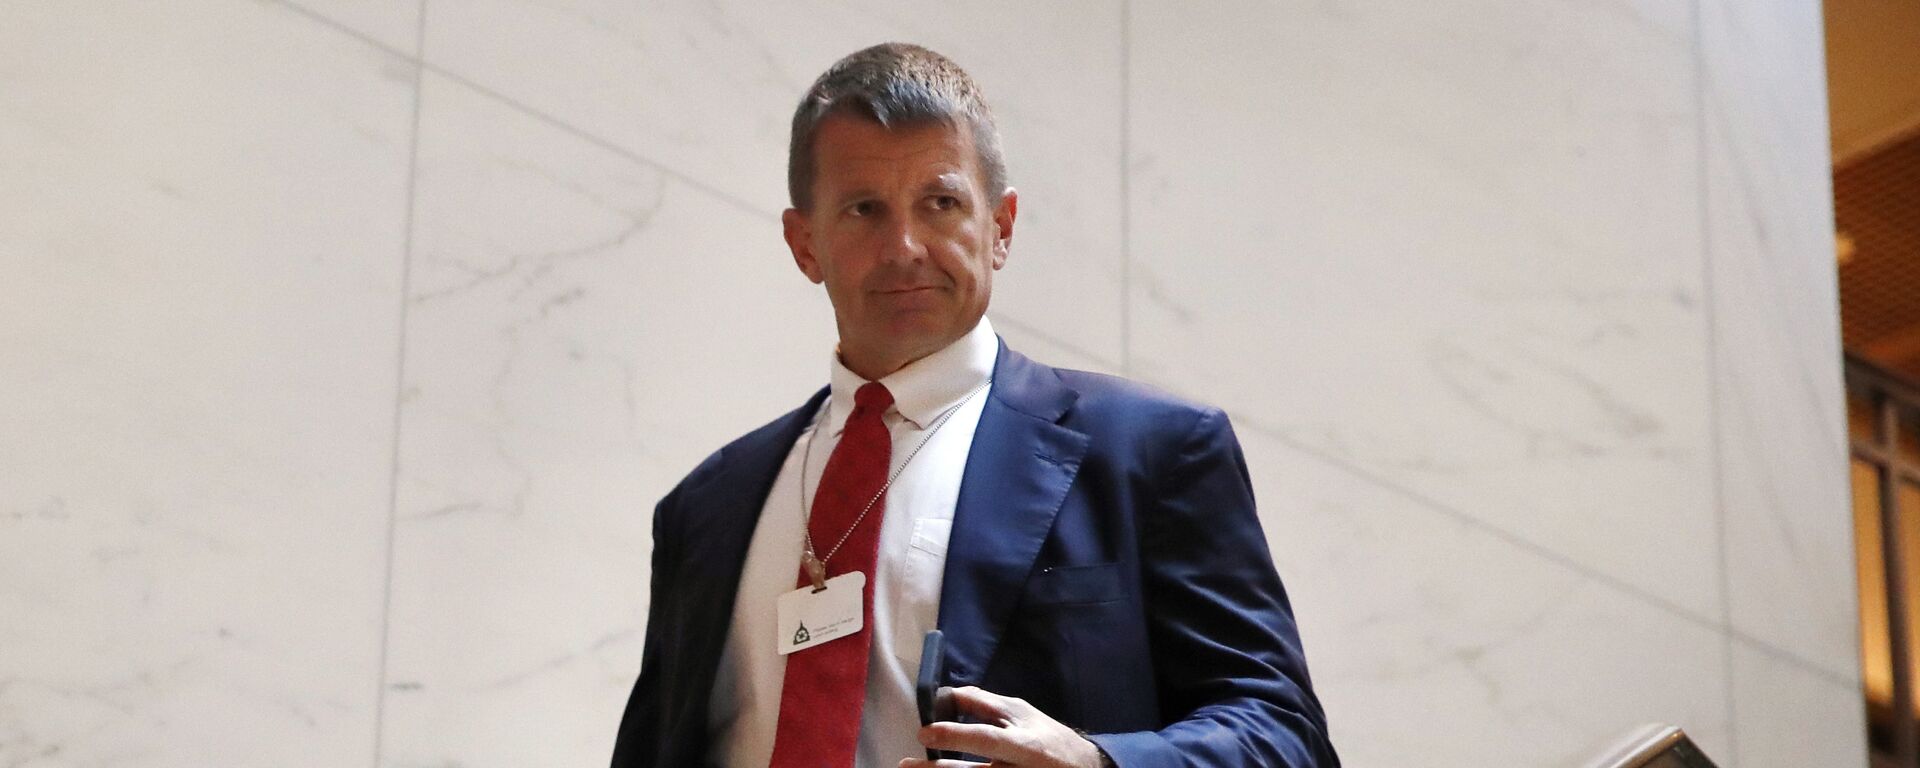 Blackwater founder Erik Prince arrives for a closed meeting with members of the House Intelligence Committee, Thursday, Nov. 30, 2017, on Capitol Hill in Washington - Sputnik International, 1920, 20.02.2021